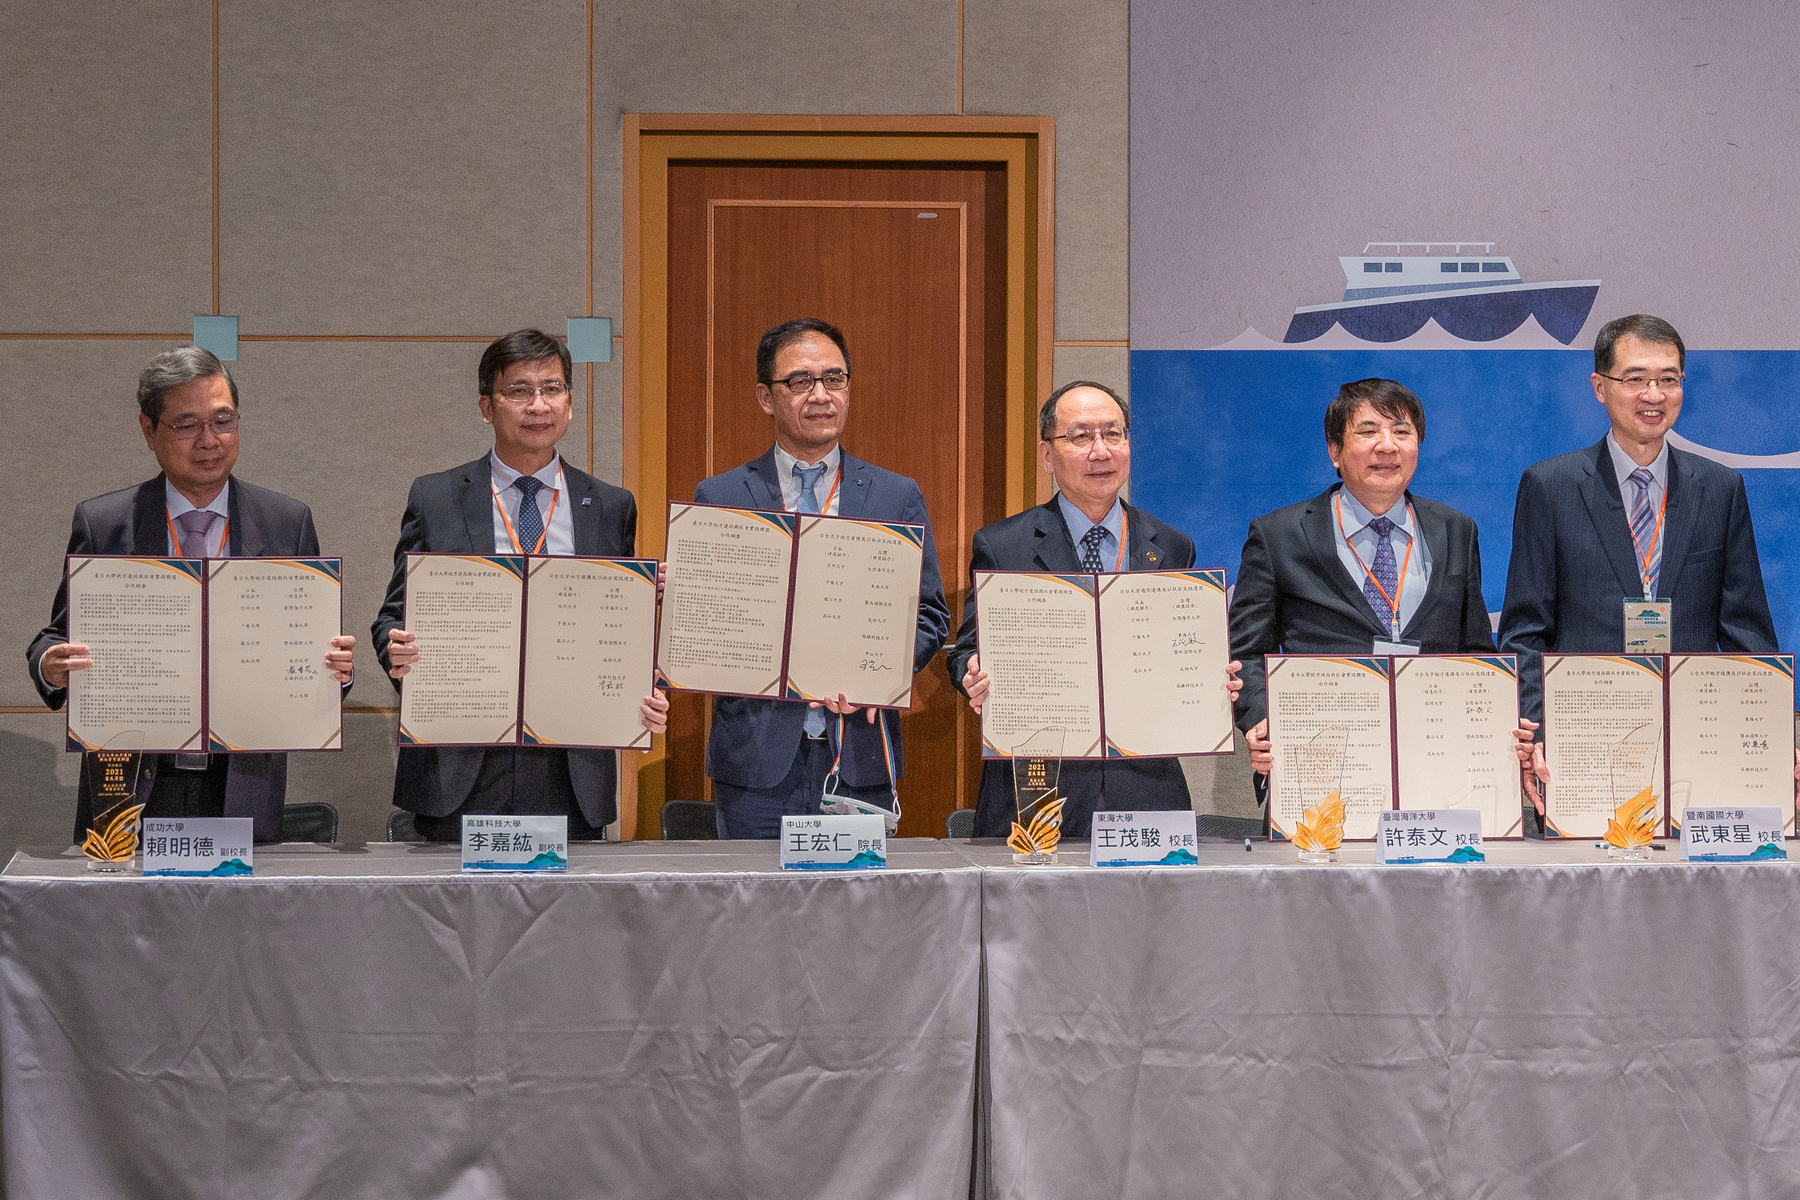 Six universities from Taiwan: National Sun Yat-sen University, National Cheng Kung University, National Taiwan Ocean University, National Chi Nan University, Tunghai University, and National Kaohsiung University of Science and Technology joined the Taiwan-Japan Alliance of Local Revitalization and Social Practice. Dean of Si Wan College Hong-Zen Wang (third from the left) signed the letter of intent on cooperation in the name of NSYSU. (Photo by Taiwan-Japan Alliance of Local Revitalization and Social Practice)